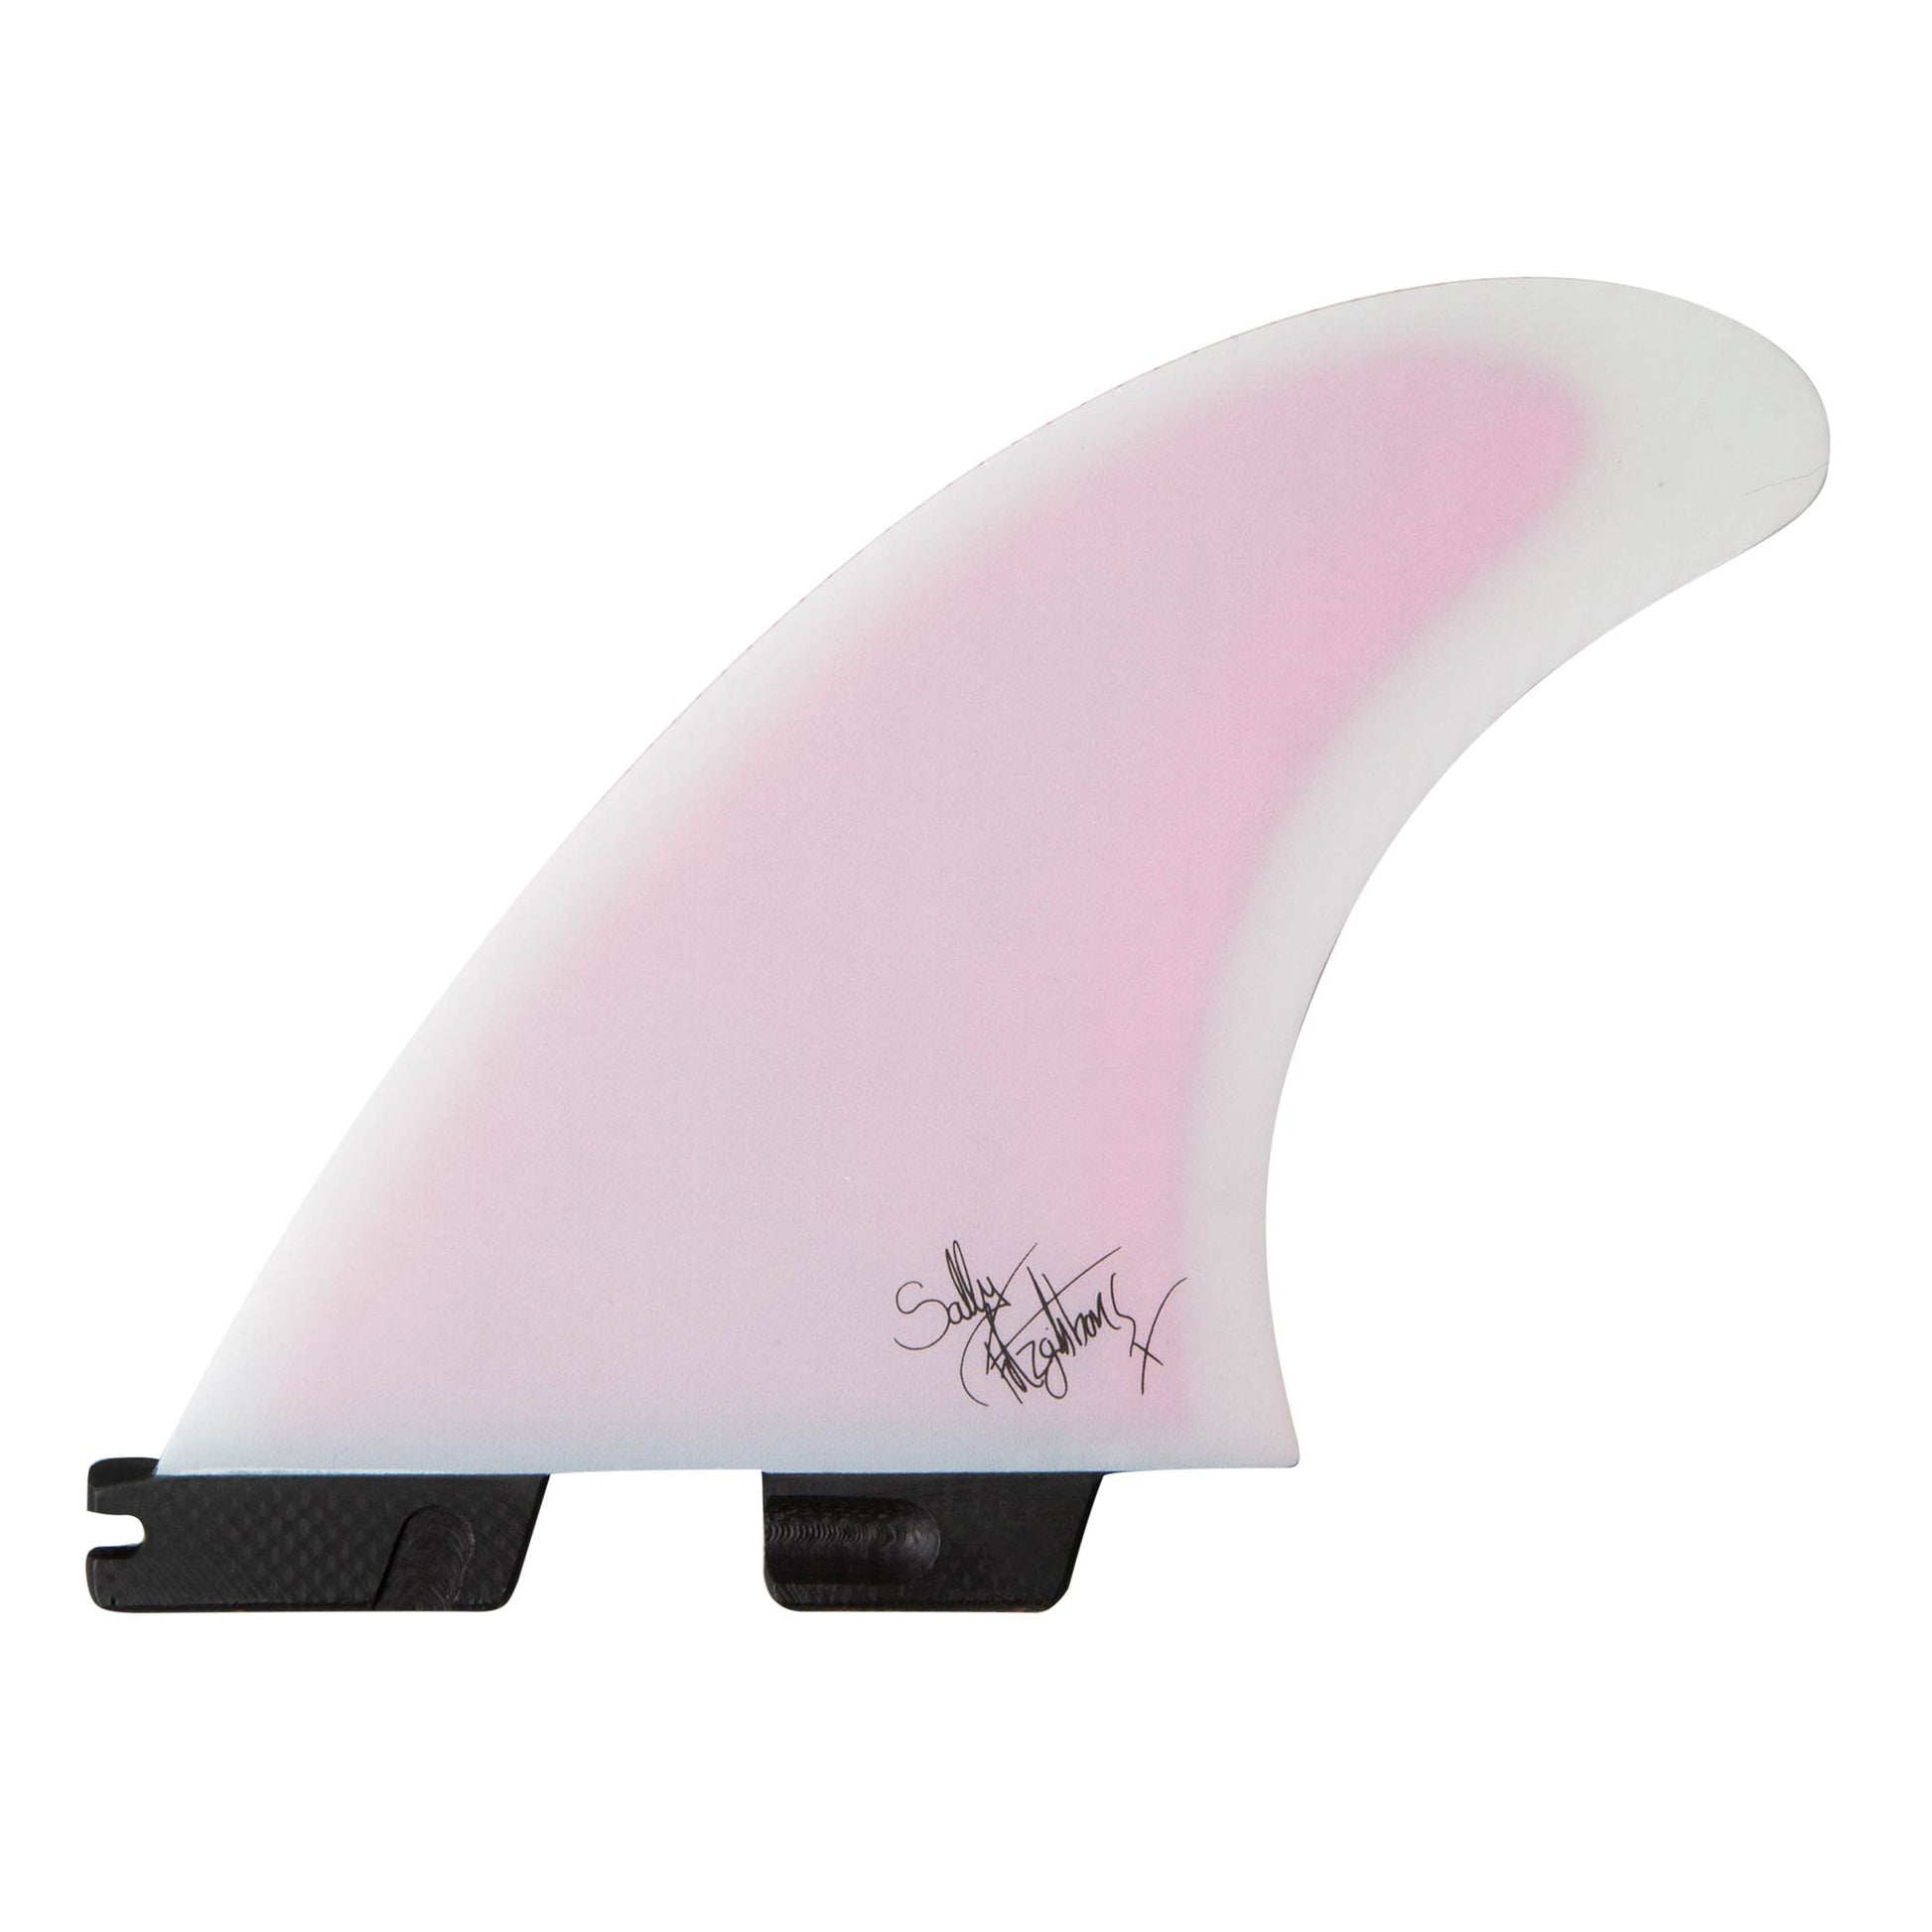 FCS II Sally Fitz PC Tri Surfboard Fin Set - Medium in dusty pink from inside with signature